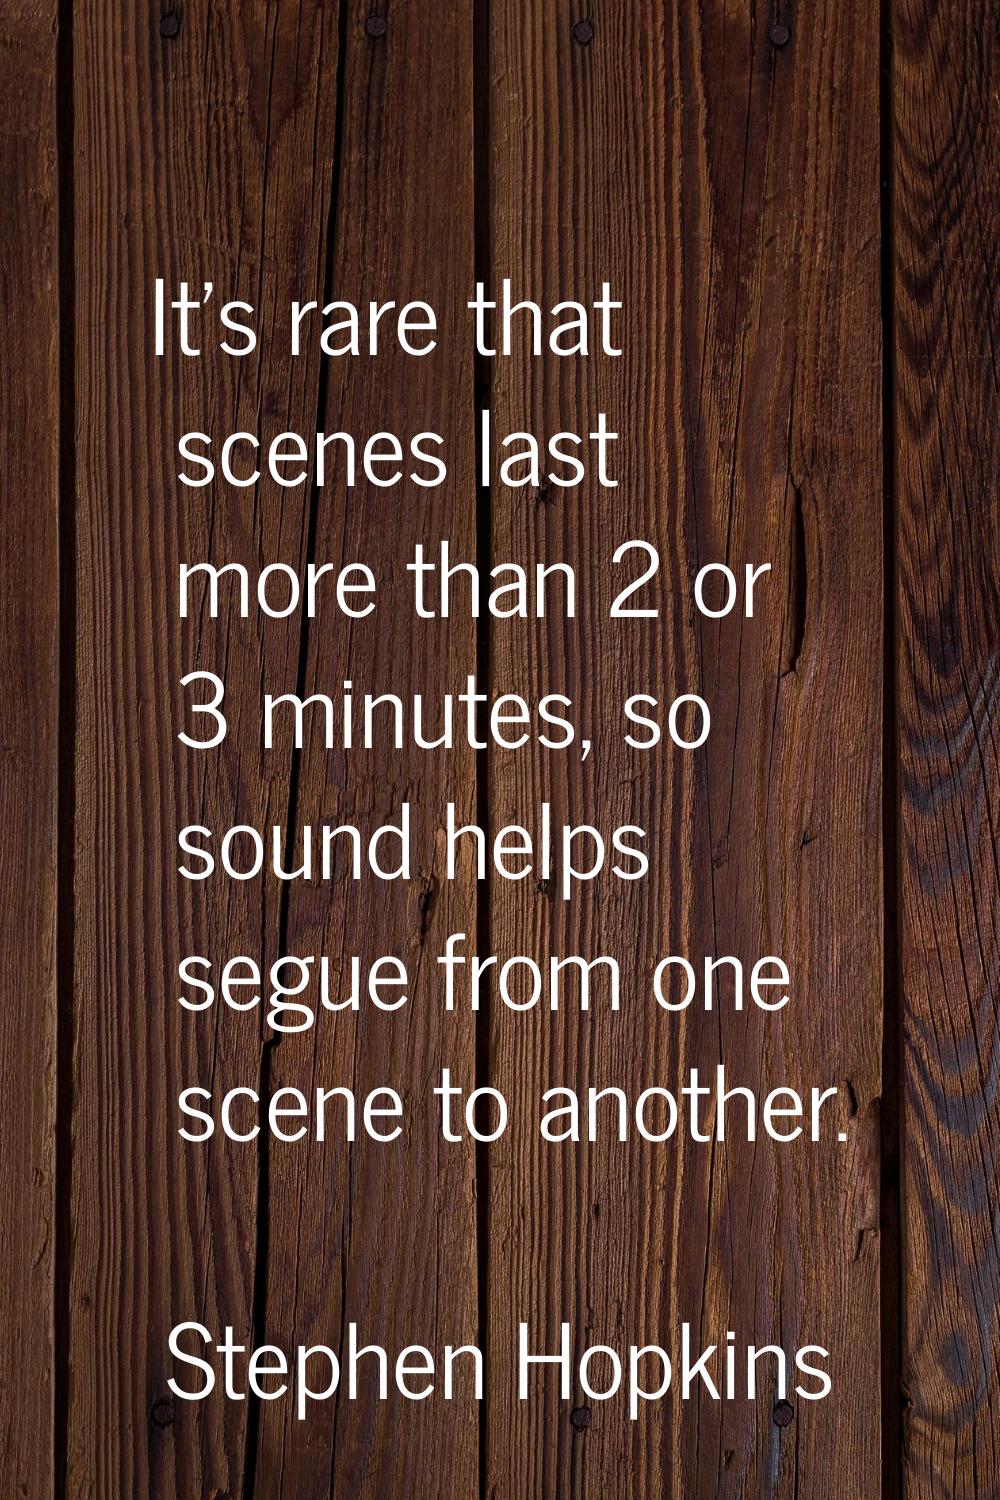 It's rare that scenes last more than 2 or 3 minutes, so sound helps segue from one scene to another